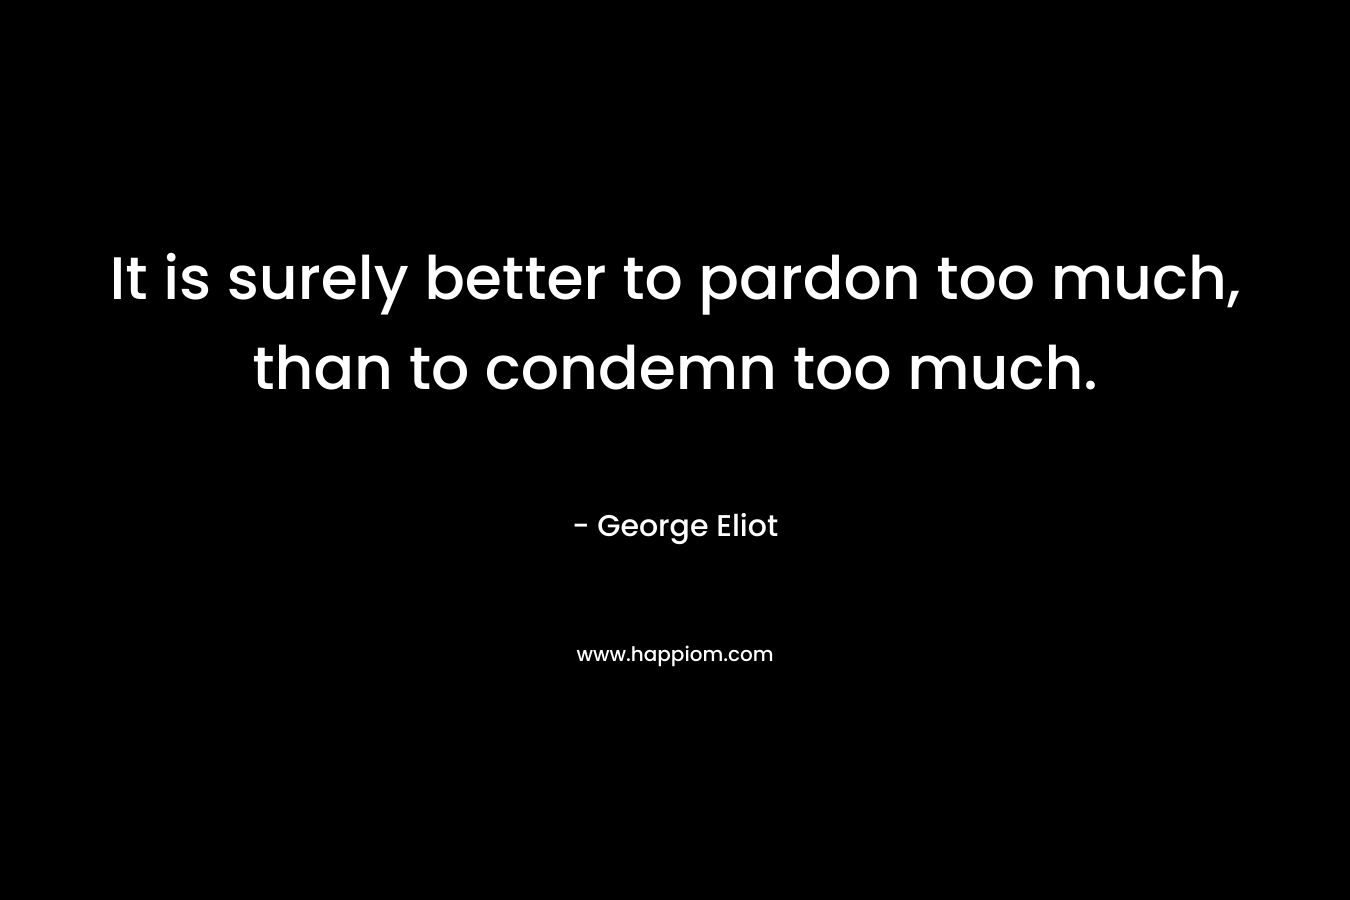 It is surely better to pardon too much, than to condemn too much. – George Eliot